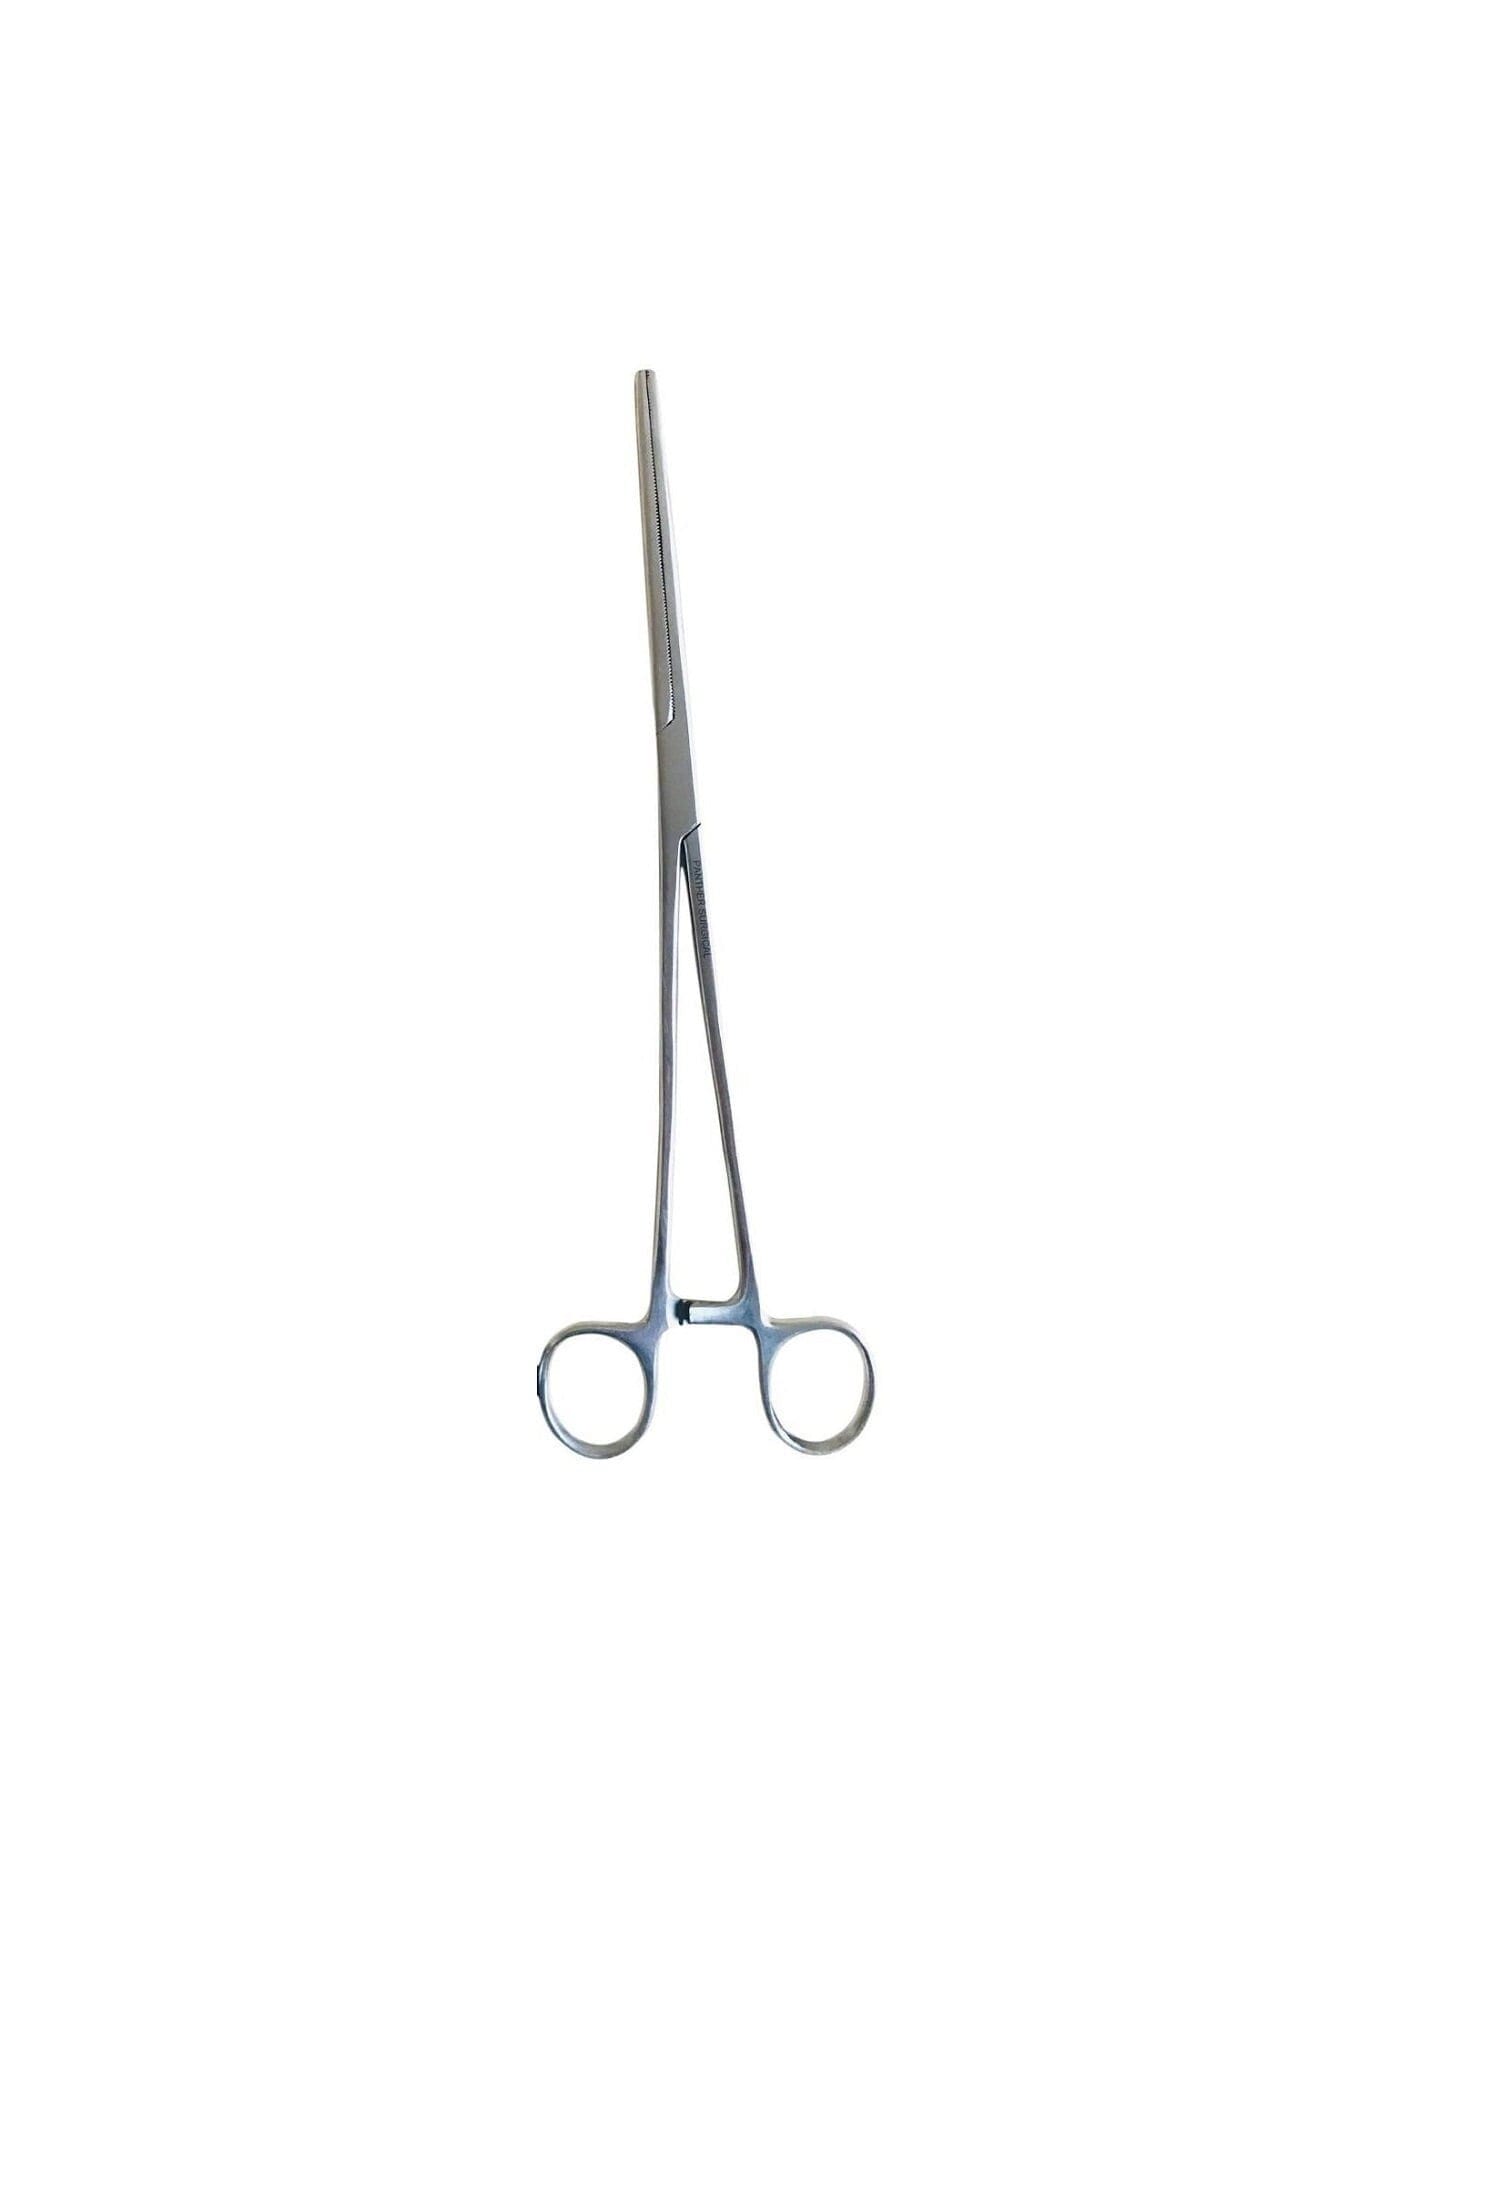 10" Forceps Straight Stainless Steel Lockable Position For Carp Pike Sea Fishing 